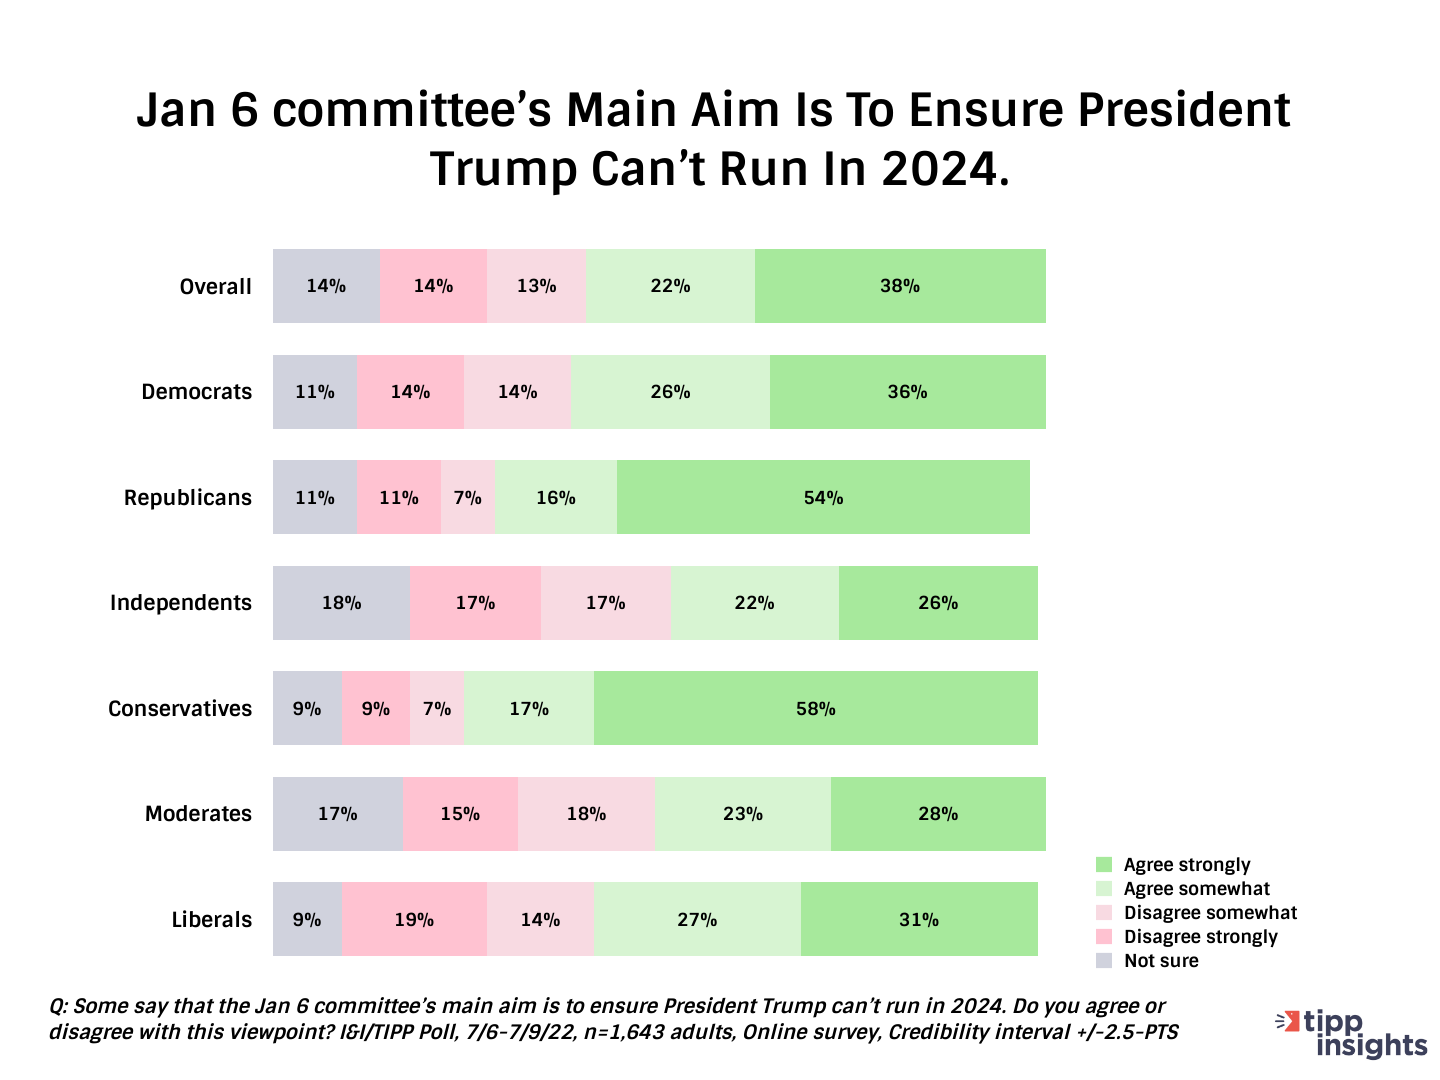 I&I/TIPP Poll Results: Do Americans believe January 6th committee's main aim is to block Trump from rerunning?